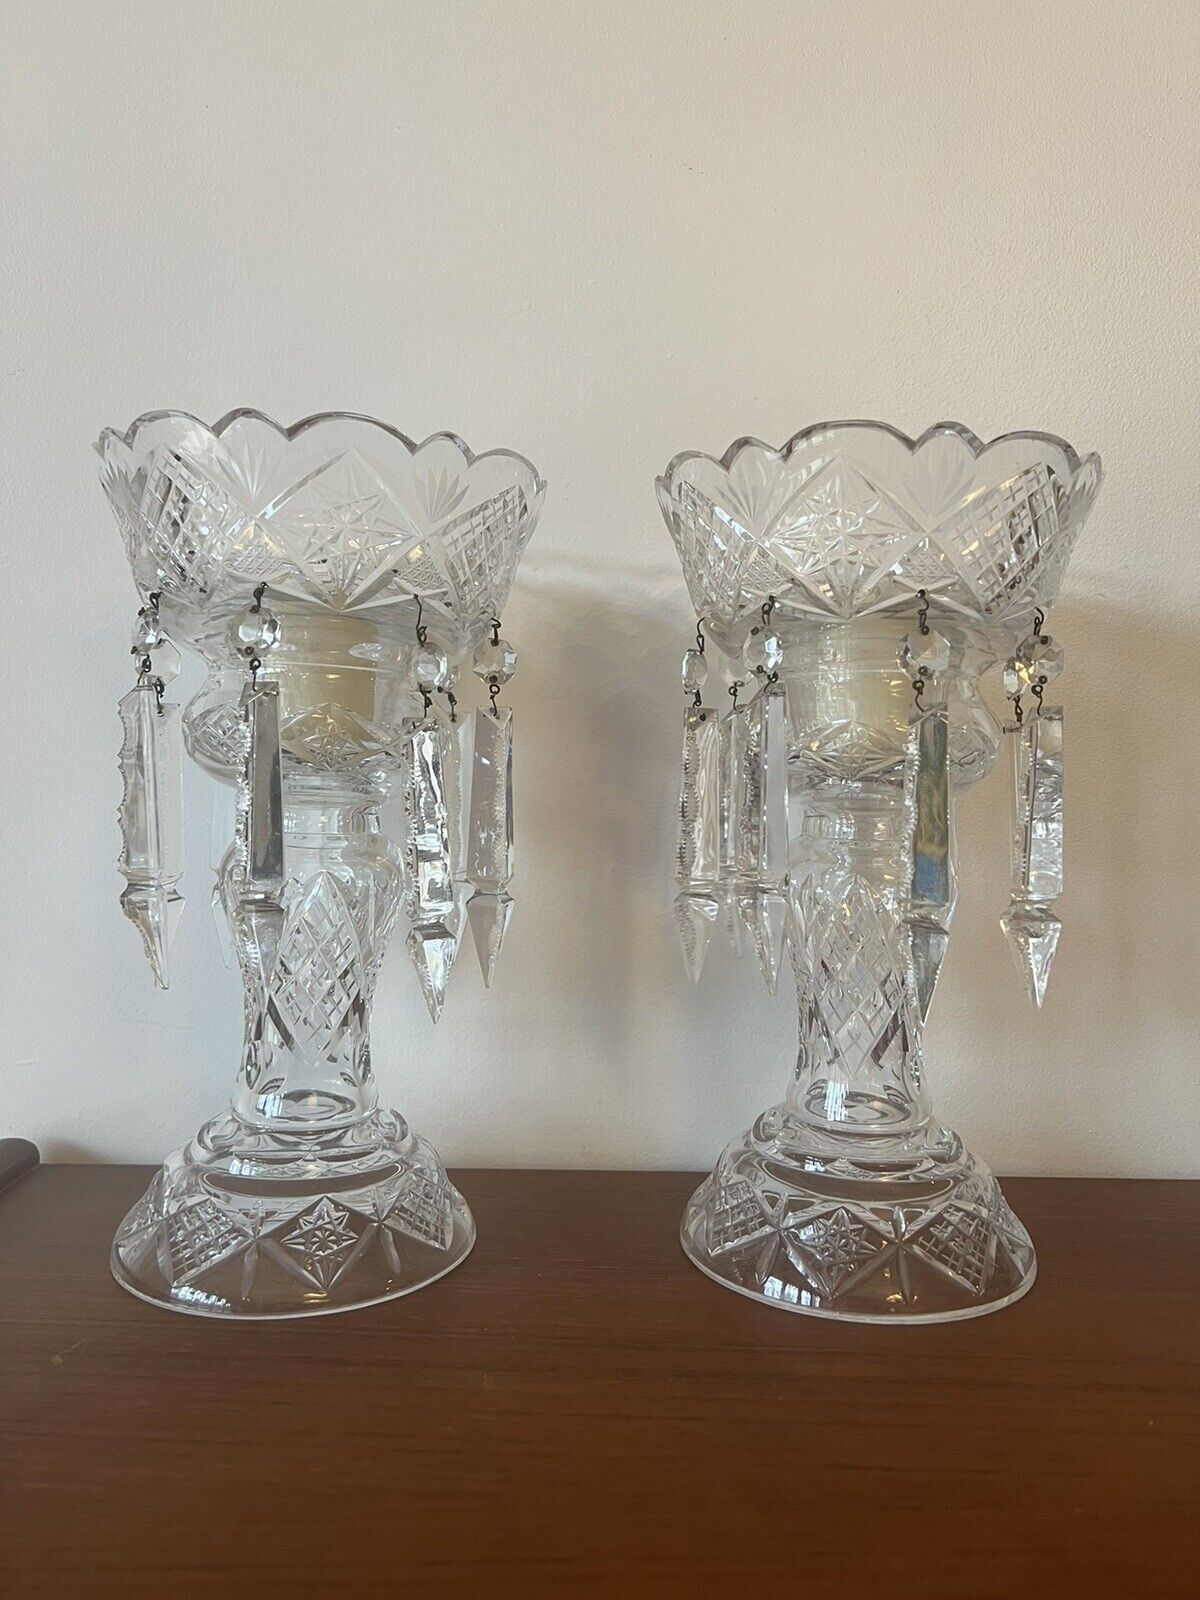 Vintage European Cut Lead Crystal Clear Luster Lamps with Spear Prisms Candle